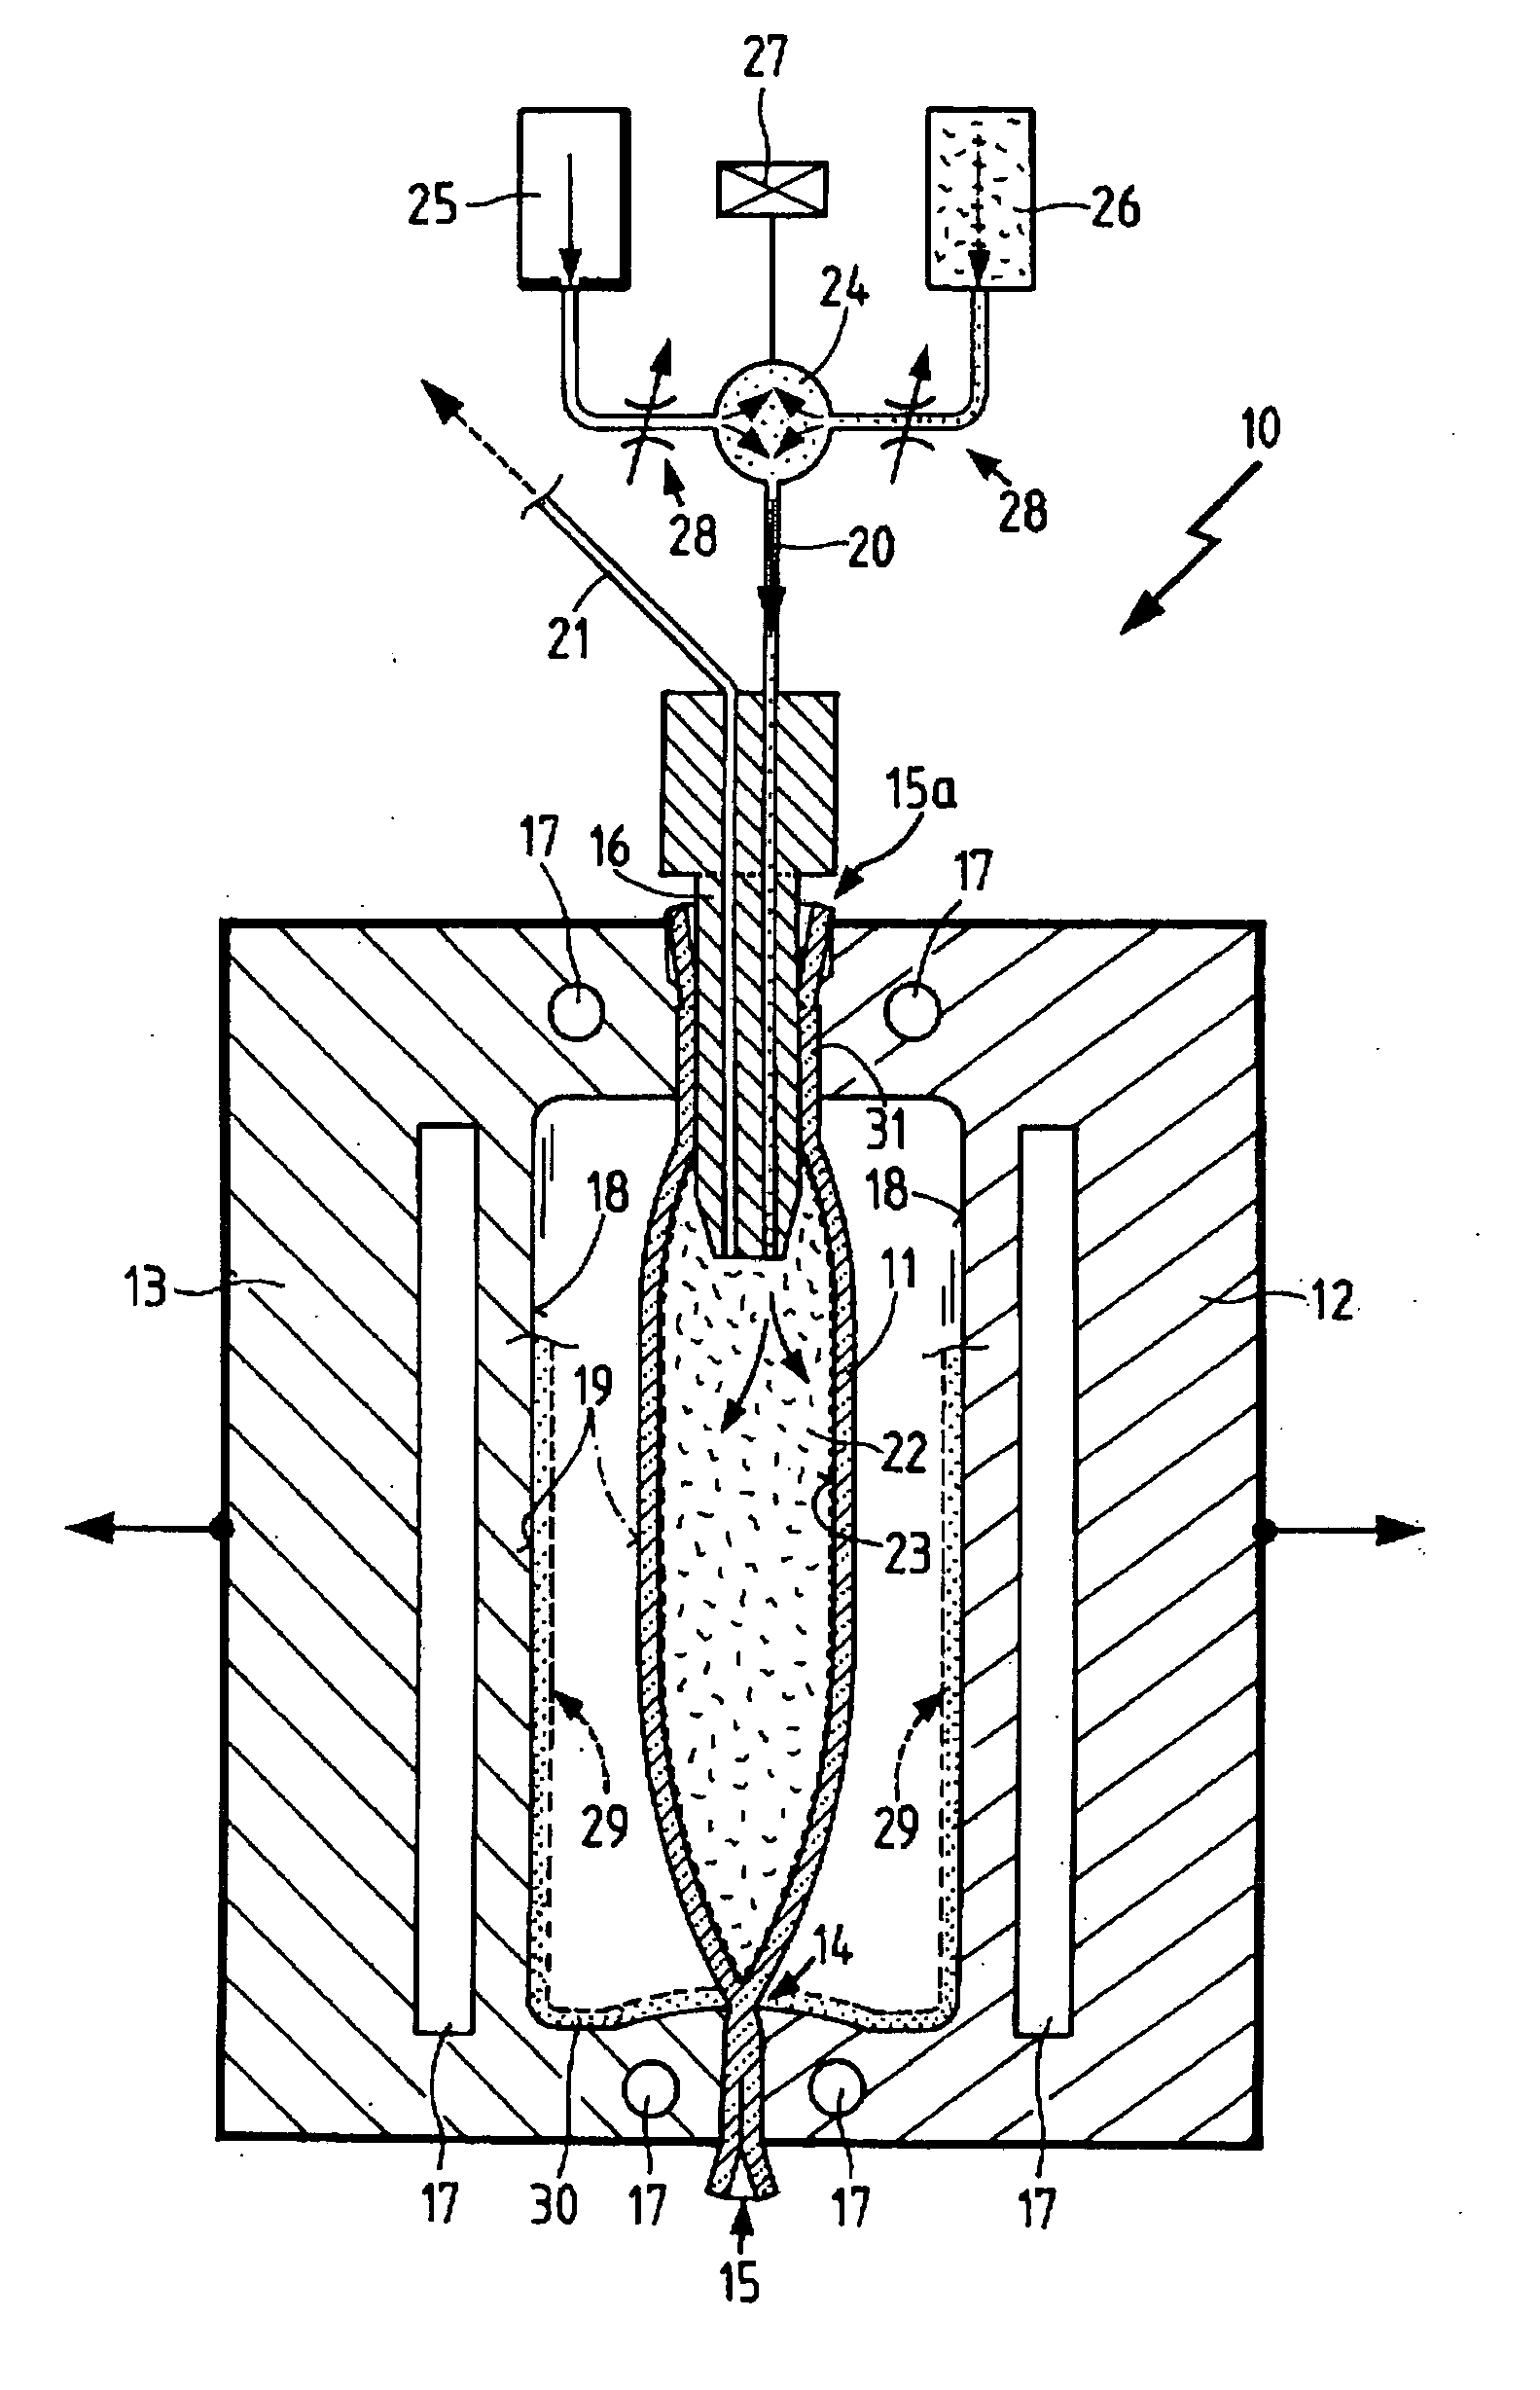 Air conducting channel